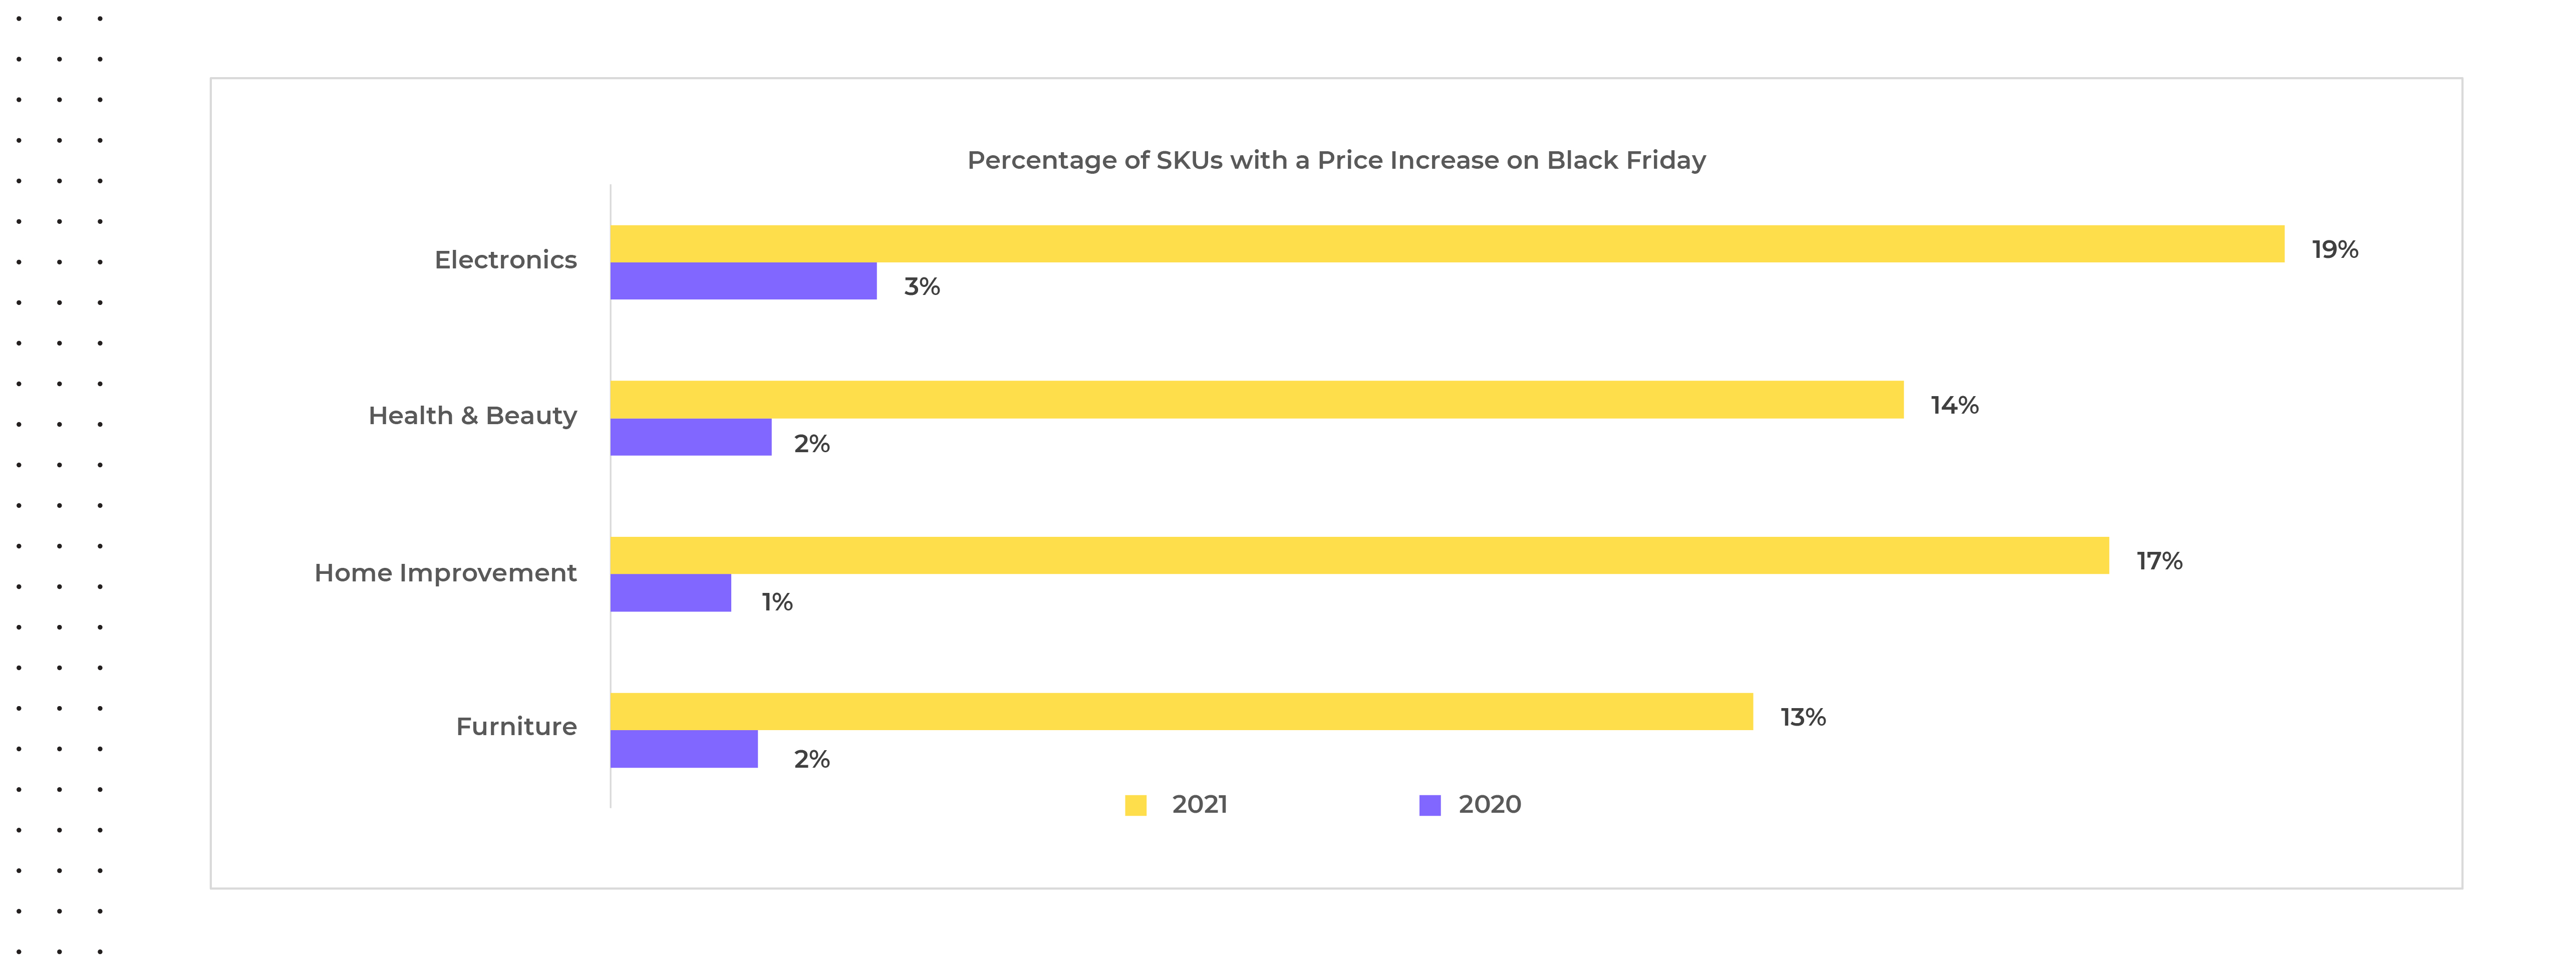 SKUs with Price Increases Black Friday 2021 and 2020